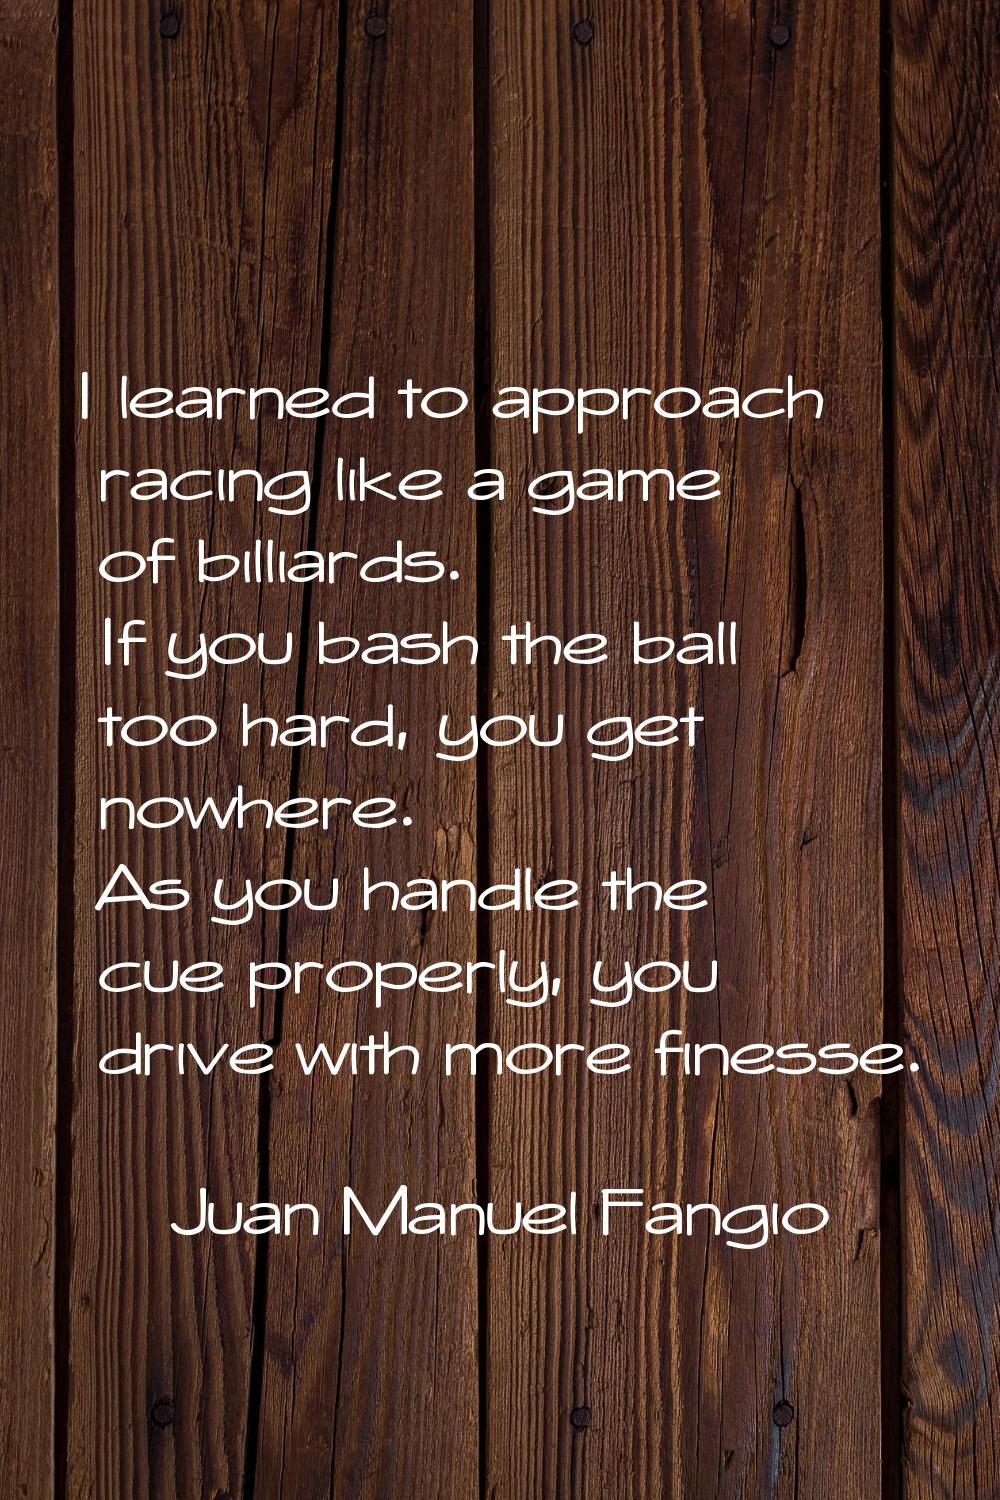 I learned to approach racing like a game of billiards. If you bash the ball too hard, you get nowhe